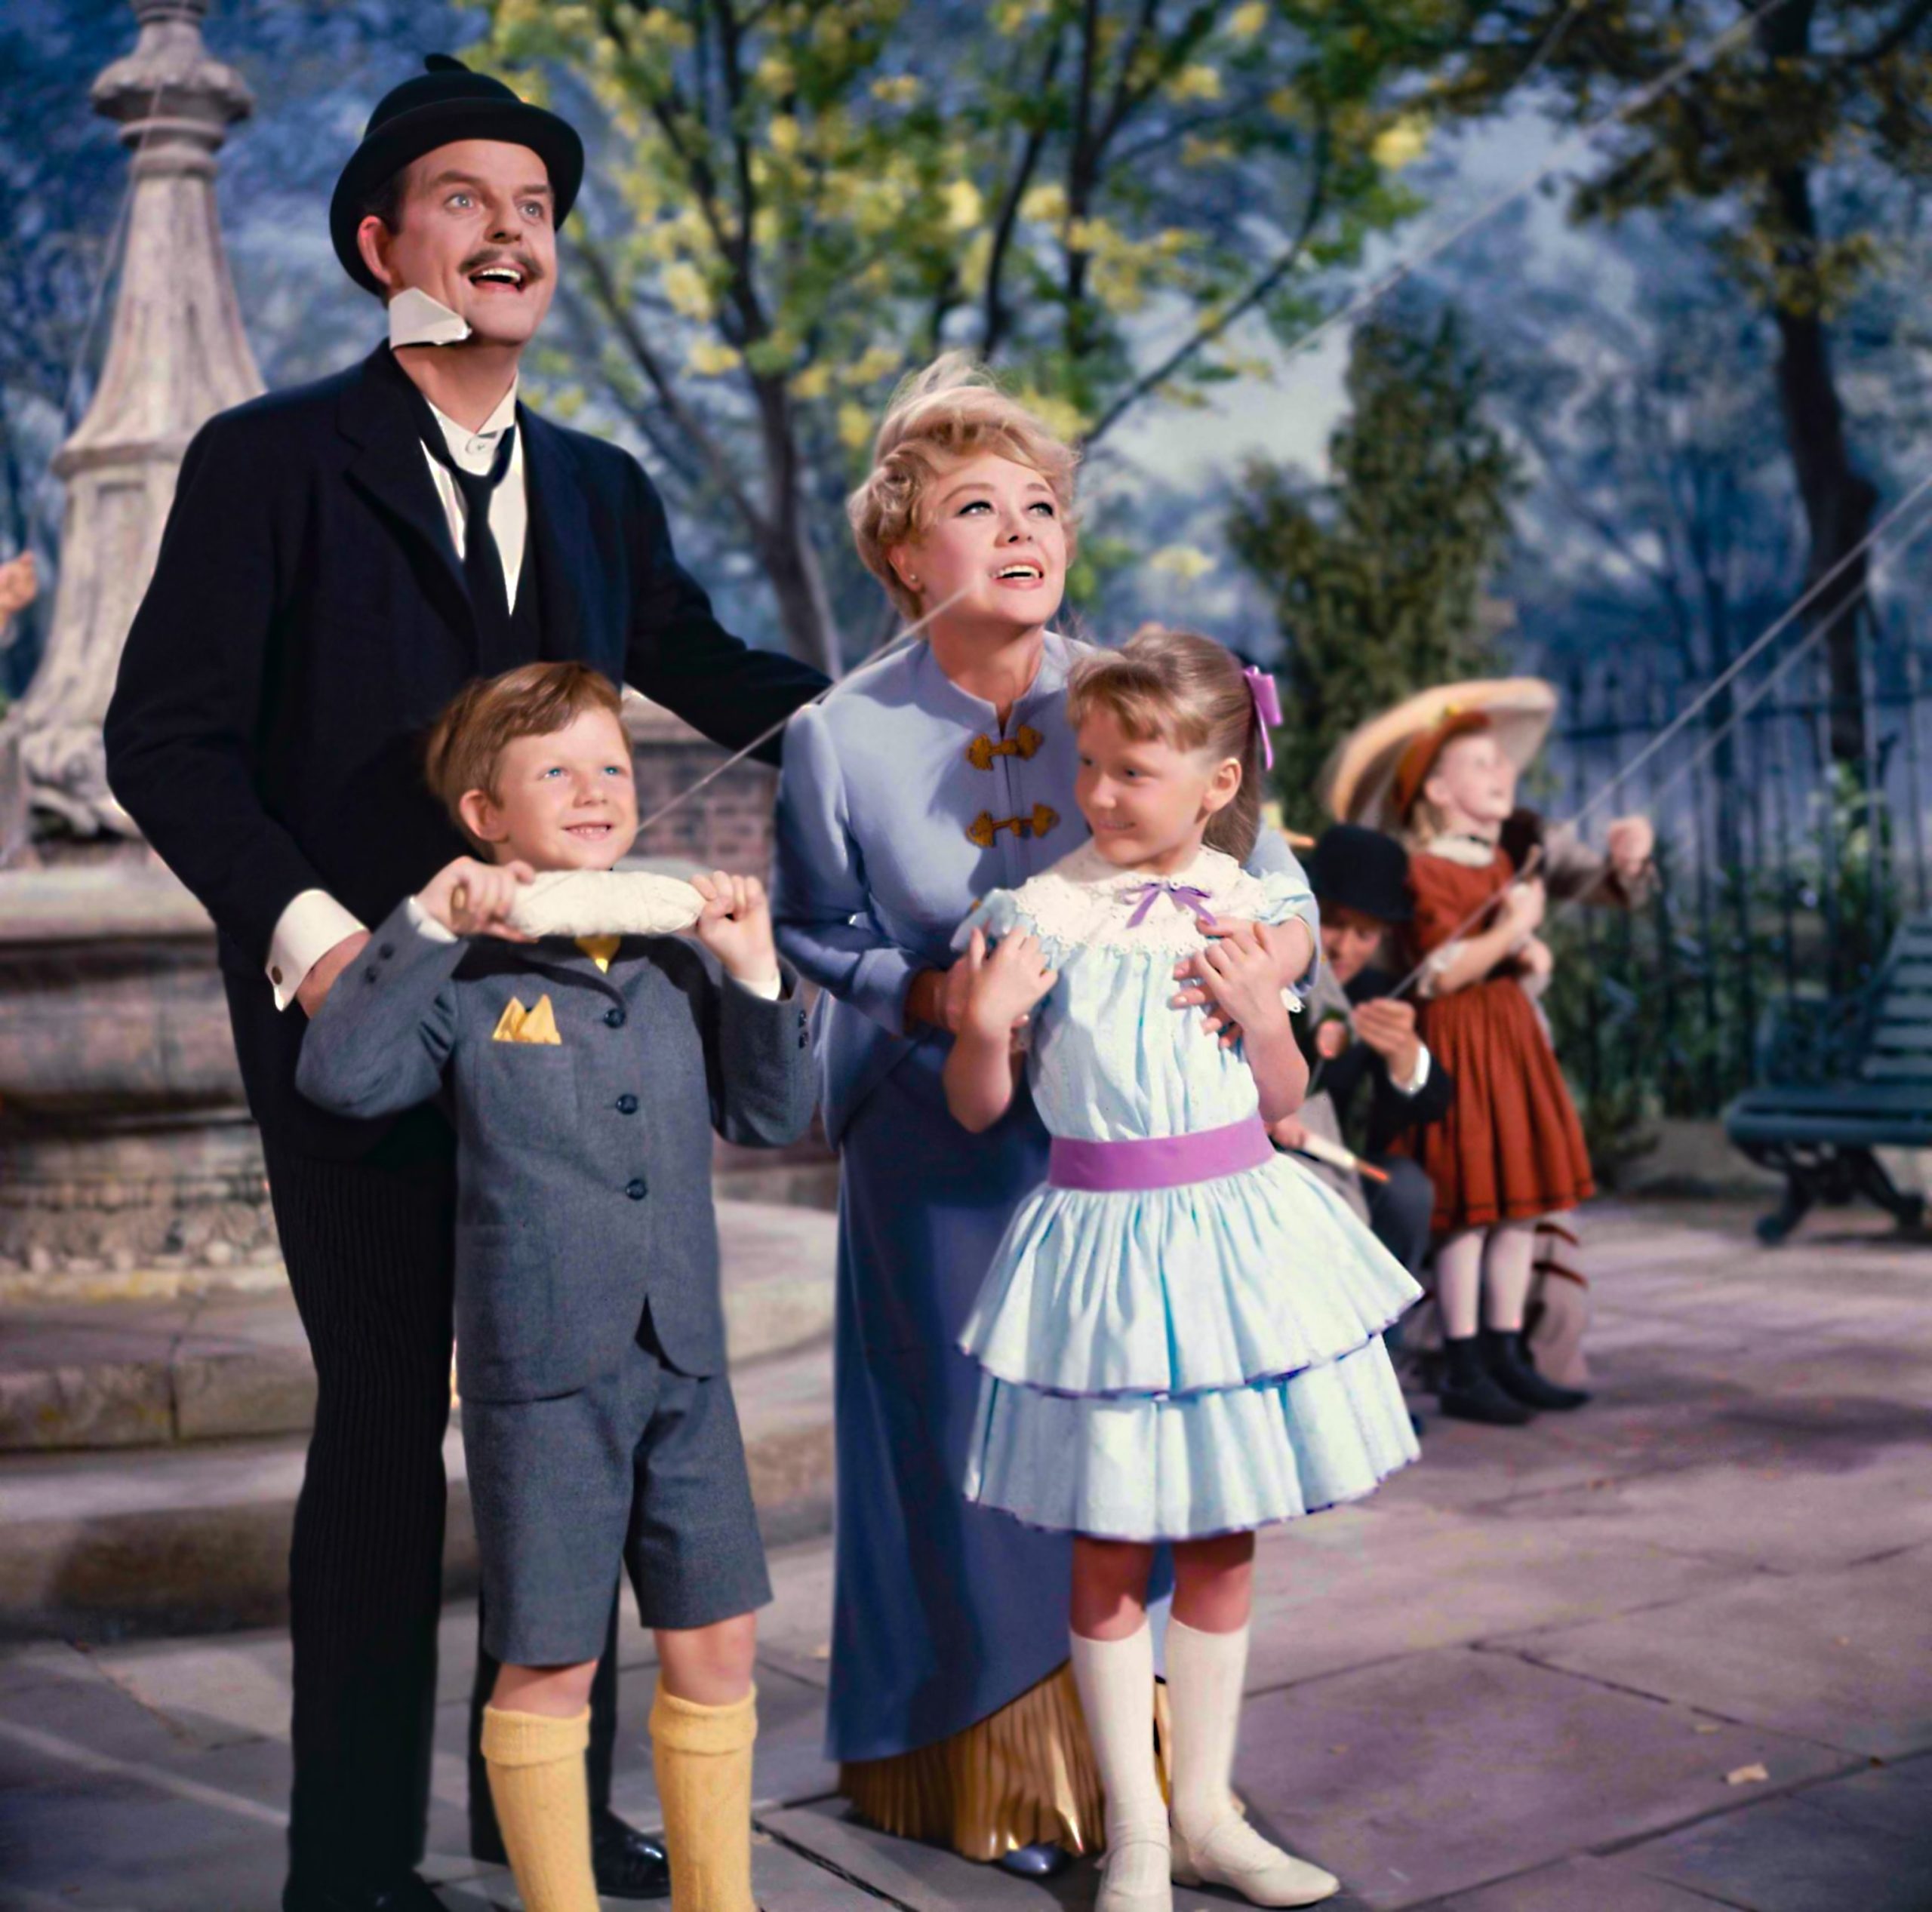 Actress Glynis Johns, known for her role in 'Mary Poppins', passes away at the age of 100